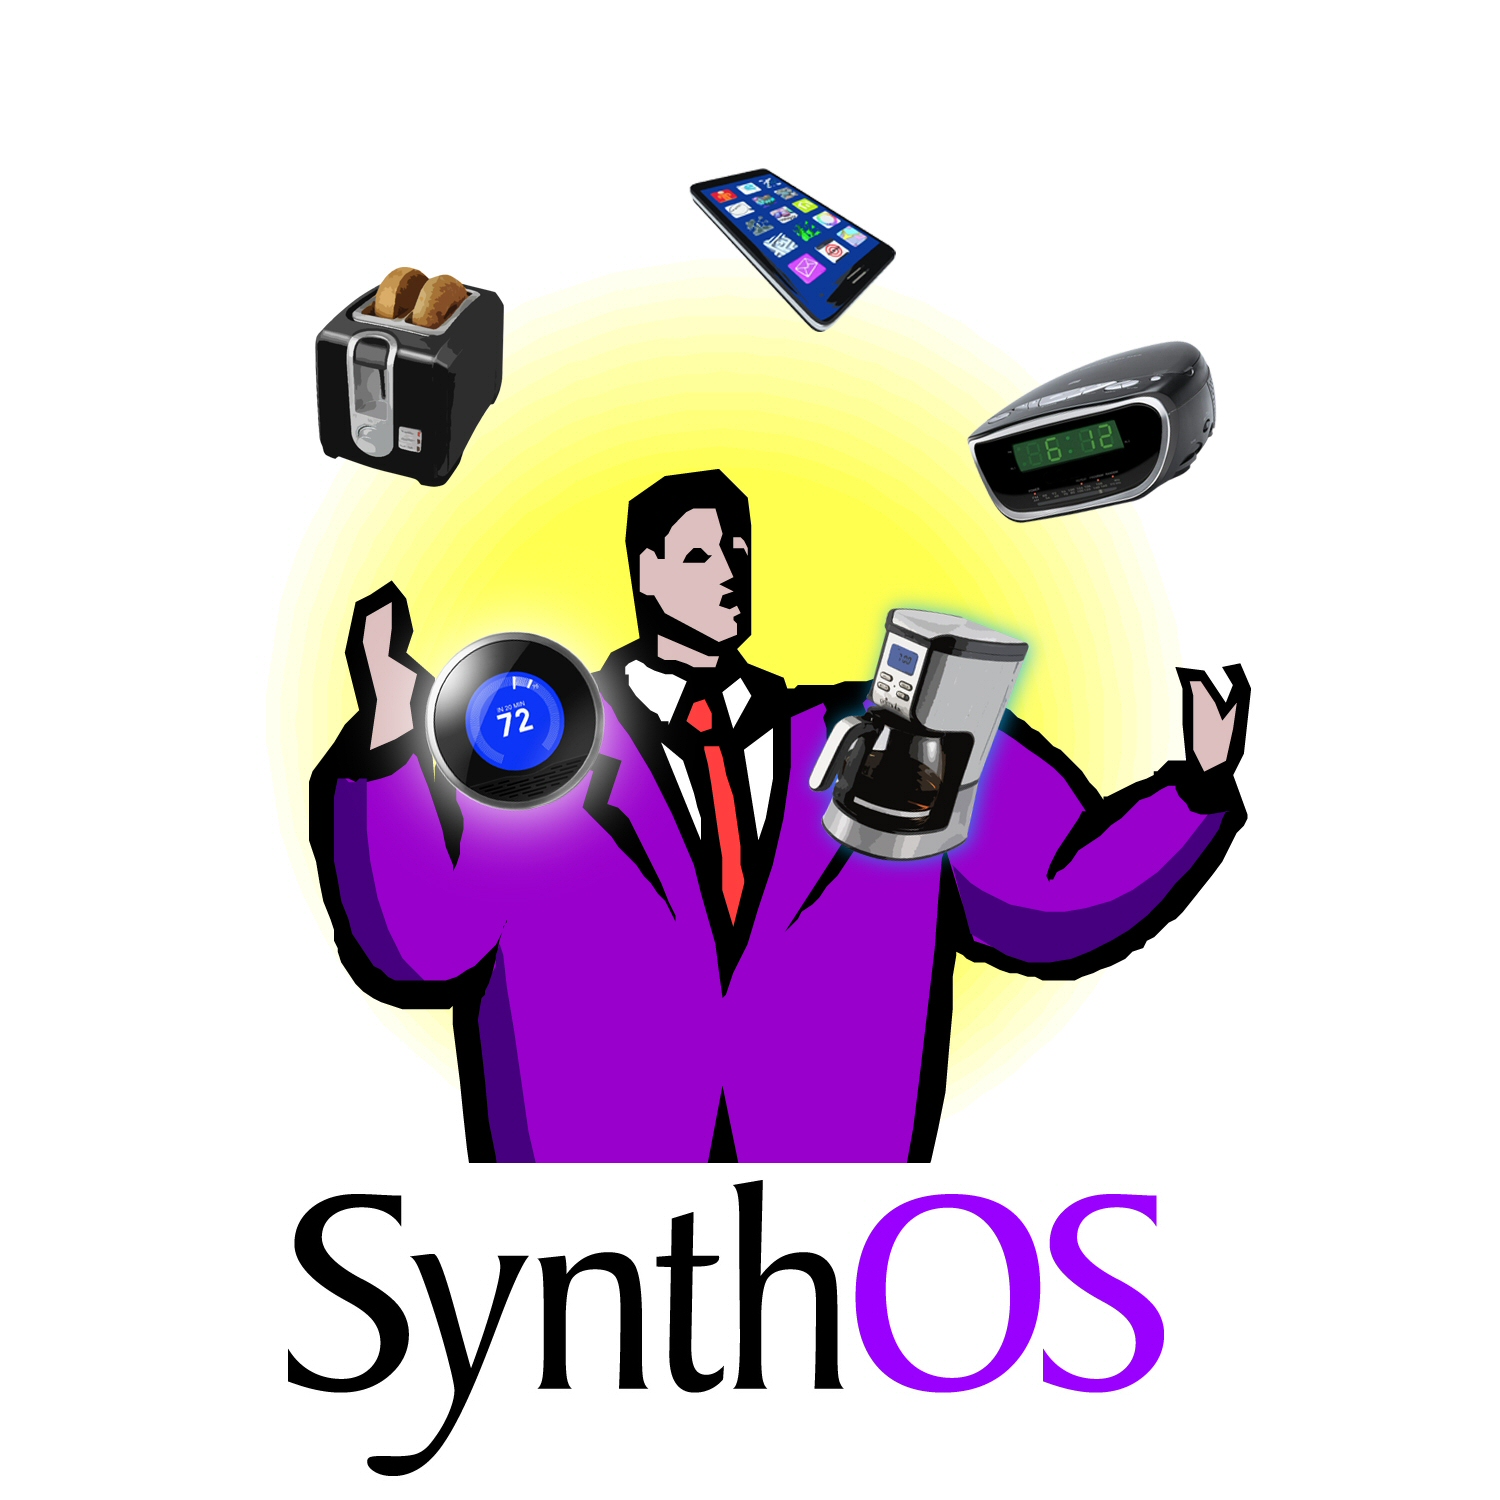 Creating a multitasking system at the push of a button using SynthOS